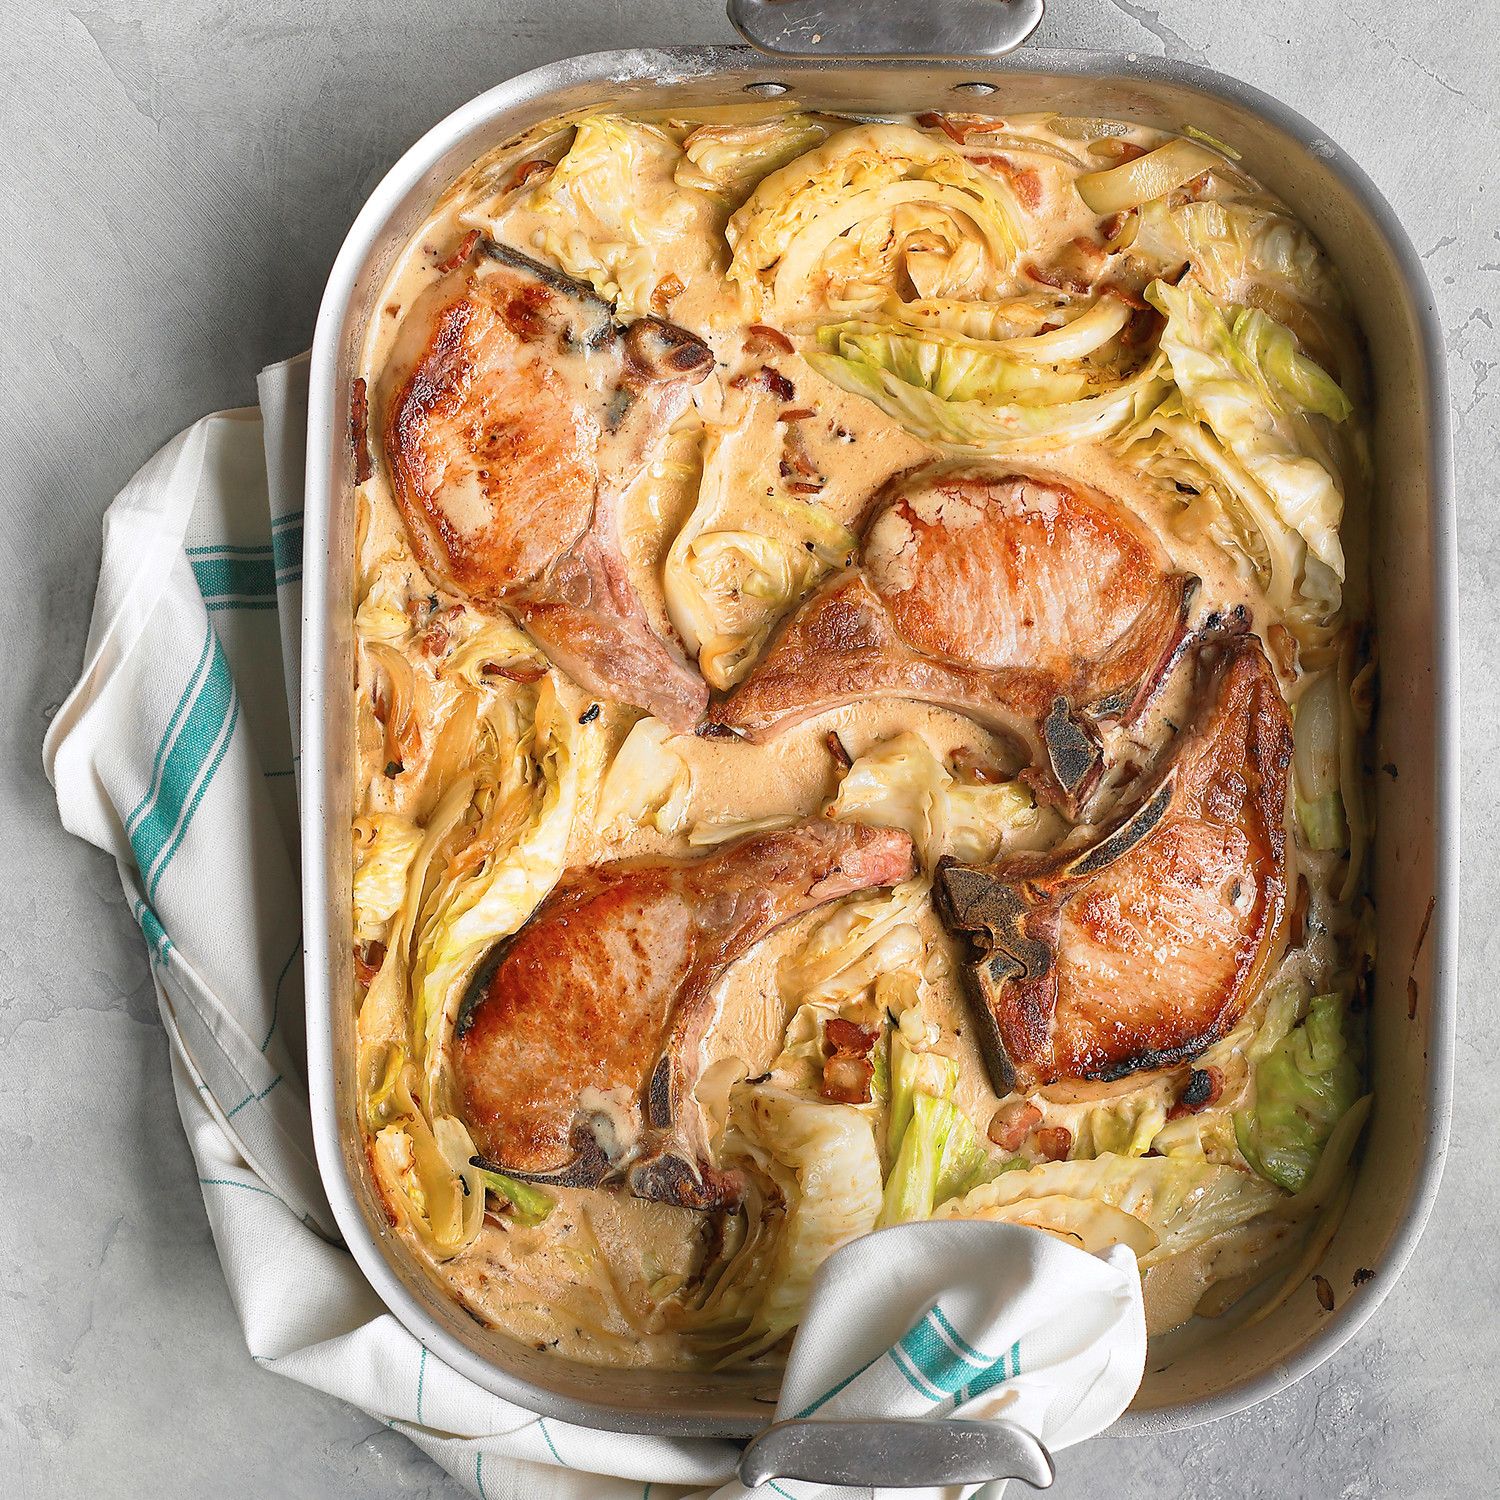 Sear the pork chops first, then bake them in this creamed cabbage and ...